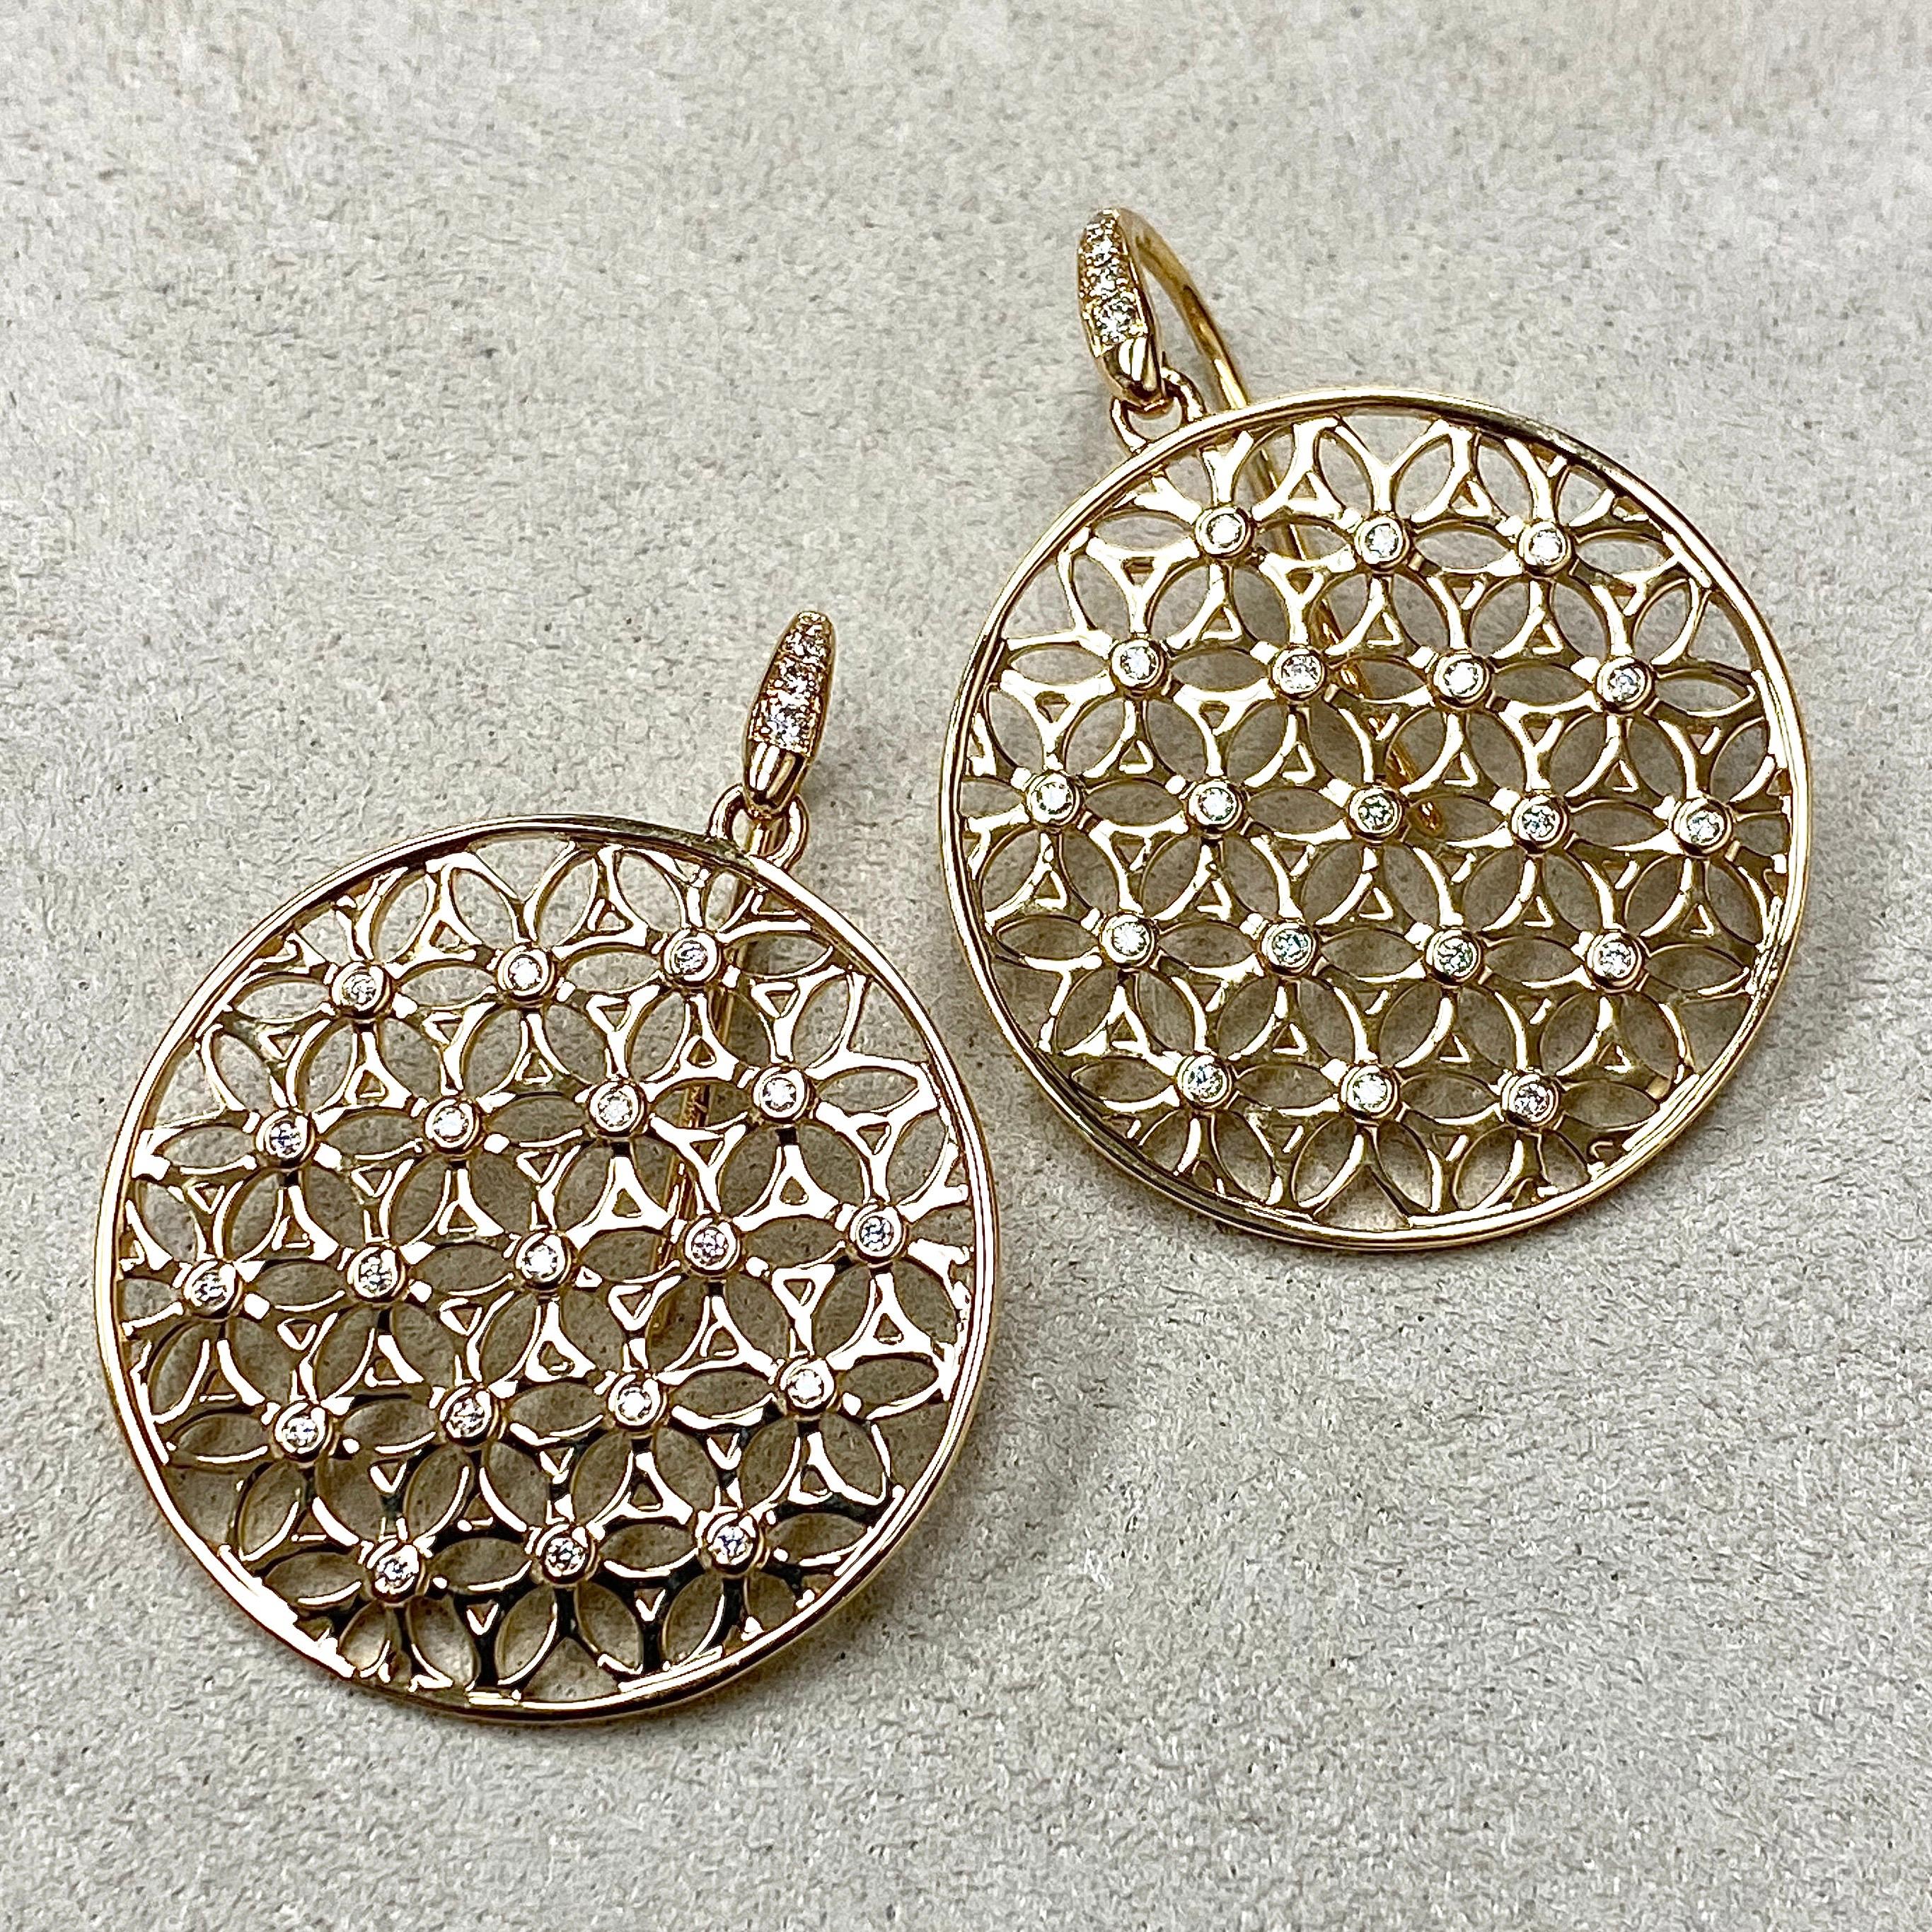 Created in 18 karat yellow gold
Flower of life motif
Diamonds 0.20 ct approx
Limited edition

These Candy Blue Topaz & Diamond Earrings are an exquisite luxury piece crafted with precision and care. Featuring a limited edition design in 18 Karat